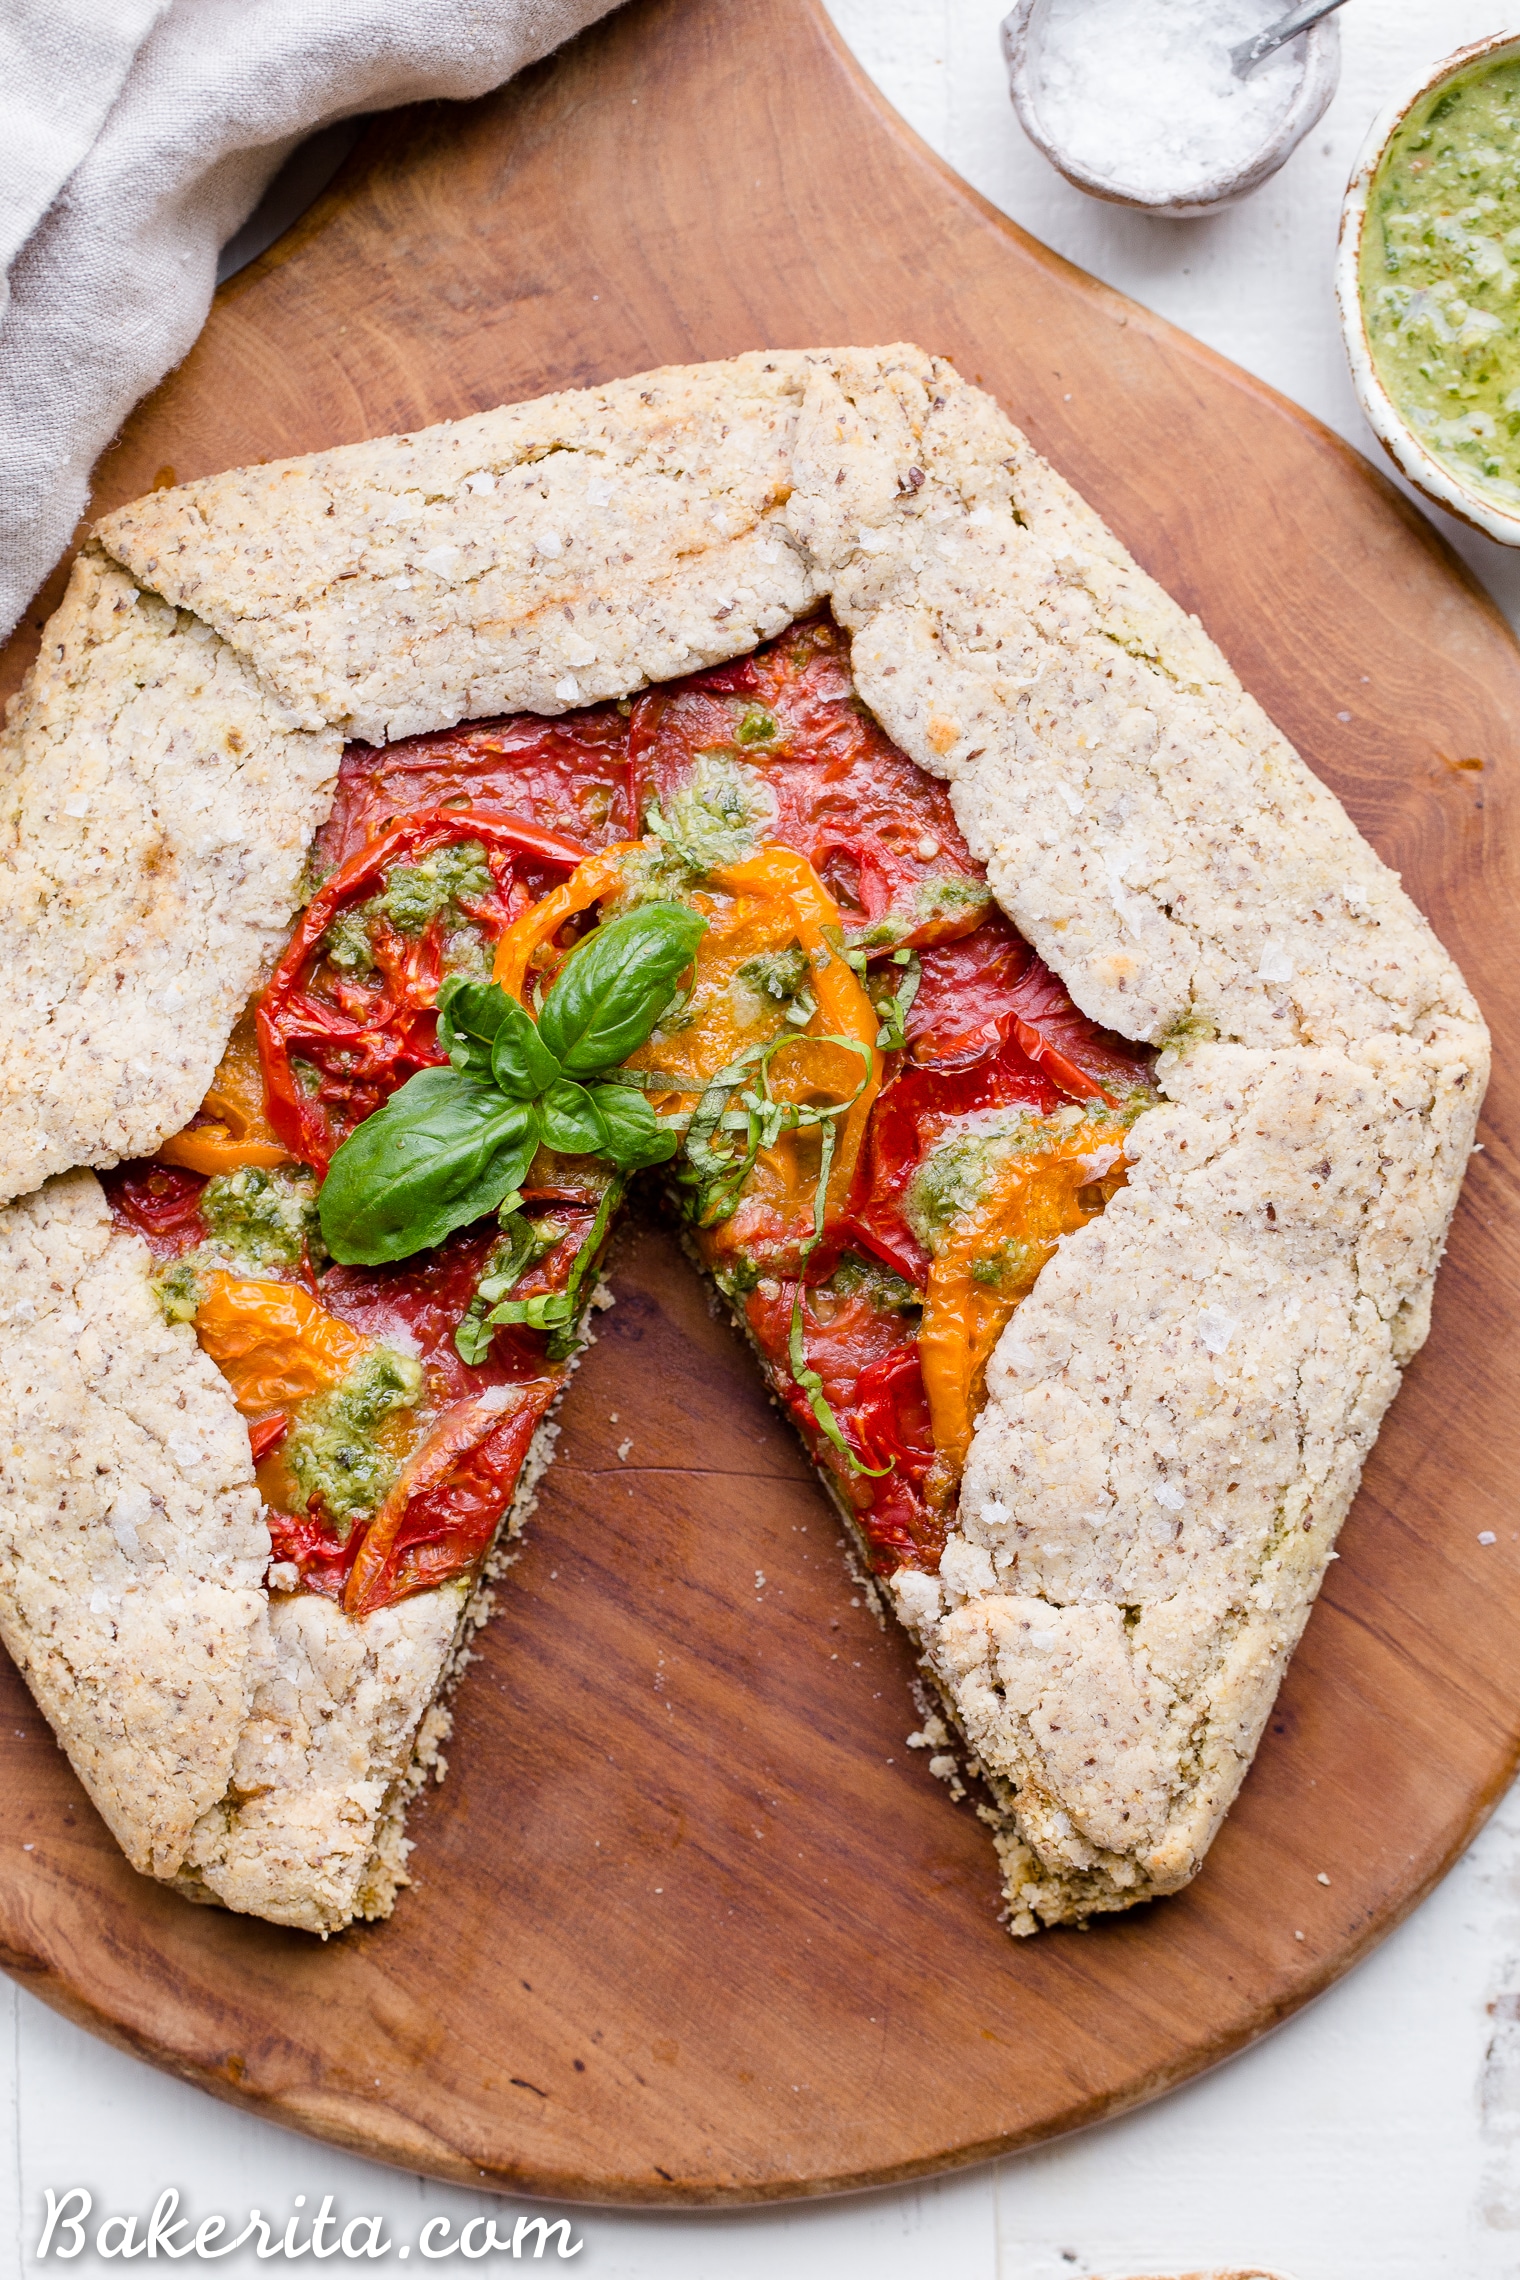 This Pesto + Heirloom Tomato Galette has an incredibly flaky, savory crust filled with homemade pesto and thick slices of heirloom tomatoes. Served warm, it's a truly delicious appetizer or meal that you'd never guess is gluten-free, paleo, and vegan.